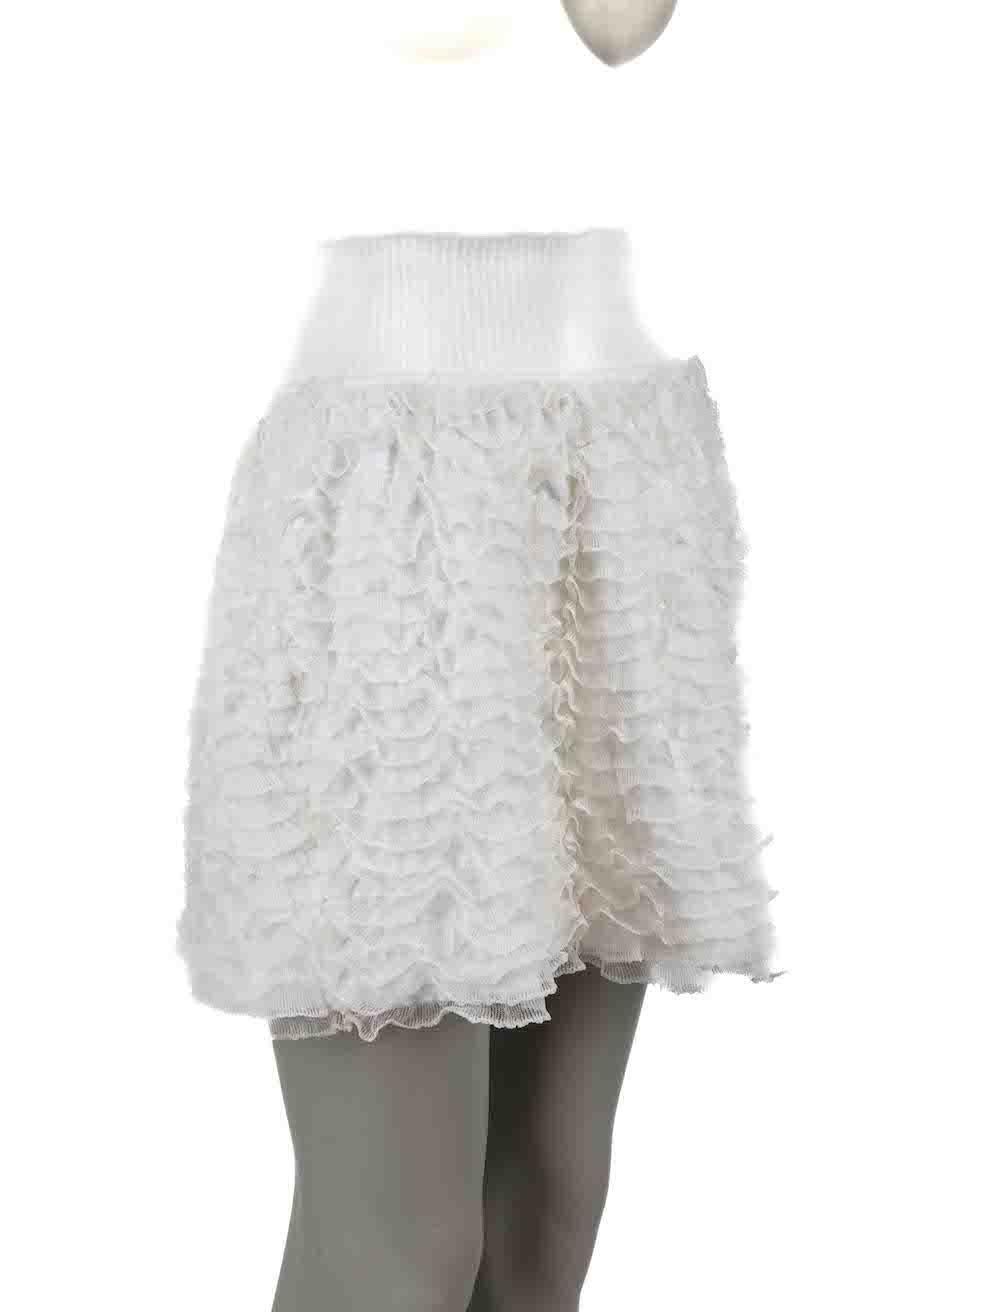 CONDITION is Very good. Hardly any visible wear to skirt is evident on this used Ala√Øa designer resale item.
 
Details
White
Viscose
Skirt
Mini
Ruffle layers
Elasticated waistband
 
Made in Italy
 
Composition
50% Viscose, 23% Silk, 14% Polyester,